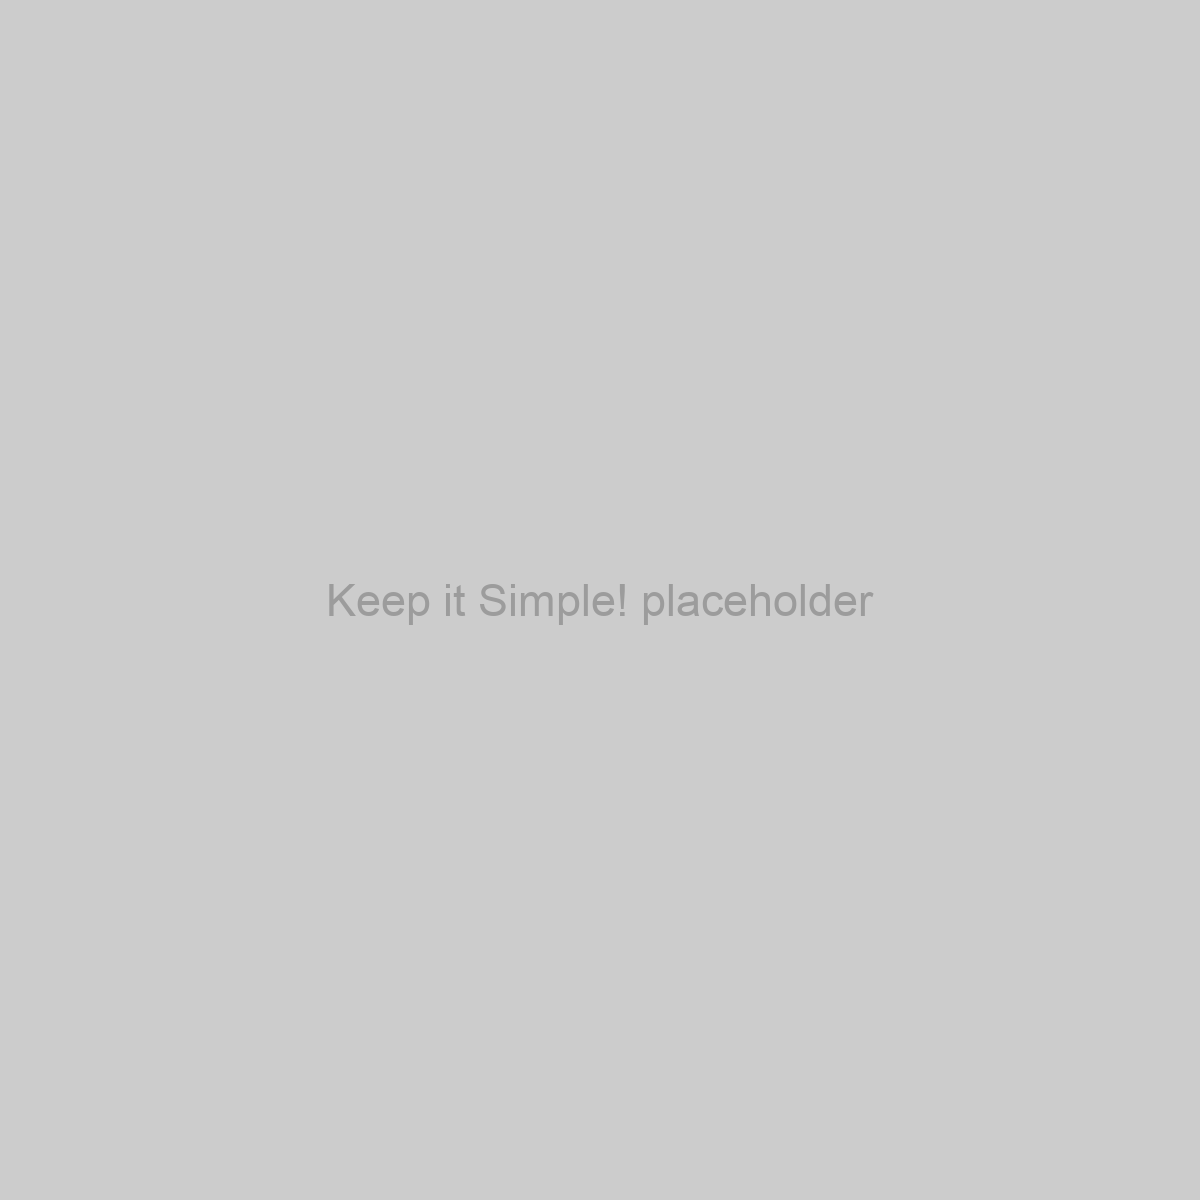 Keep it Simple! Placeholder Image